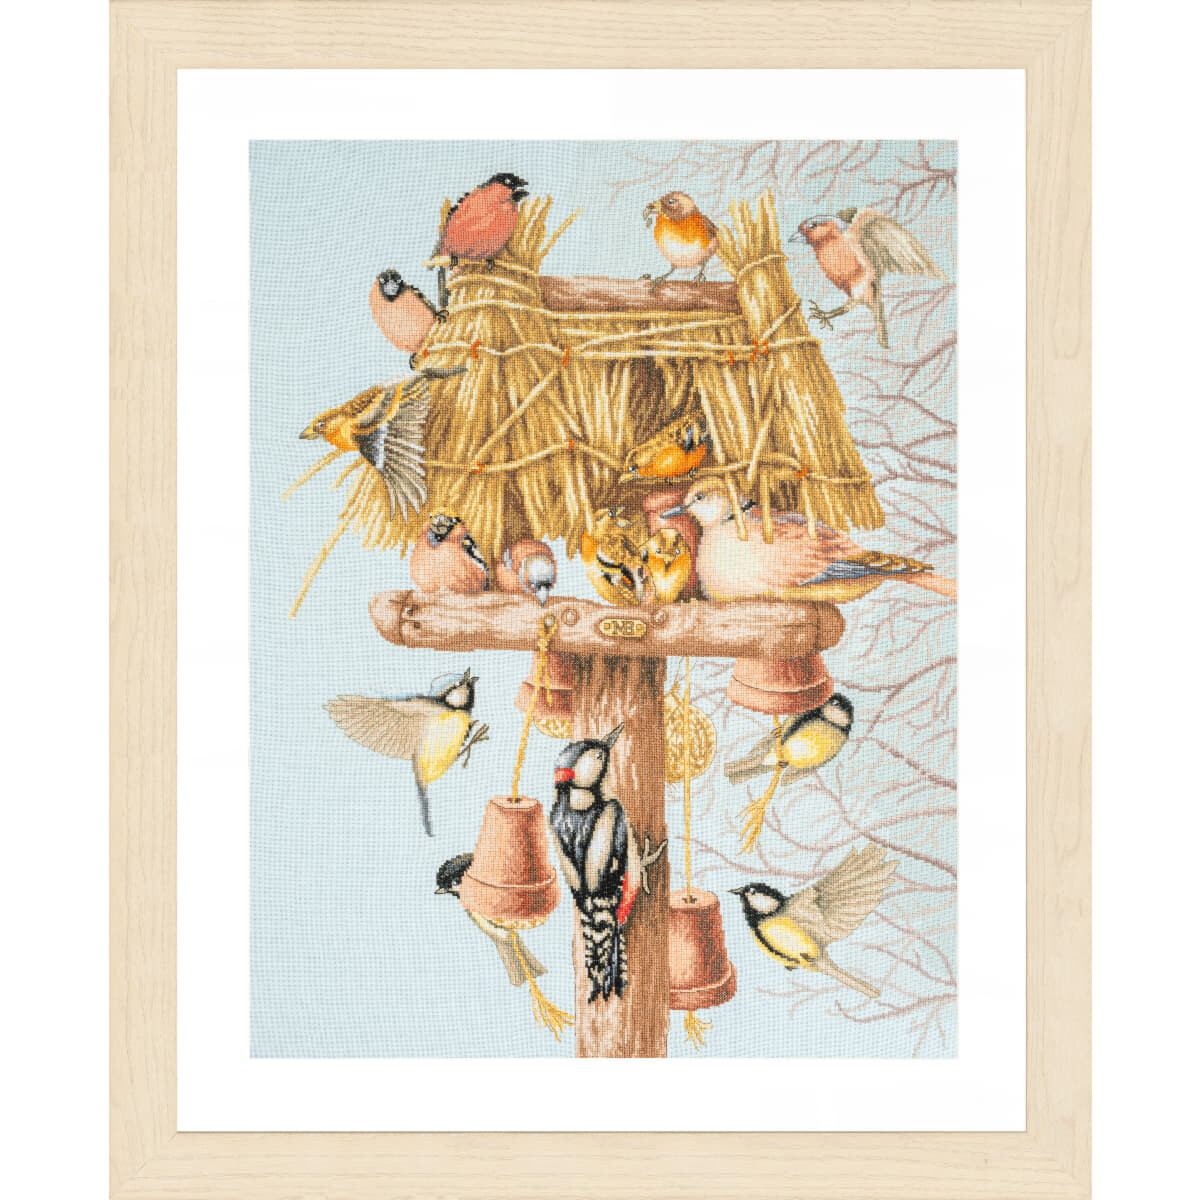 A framed illustration of various birds gathered around a...